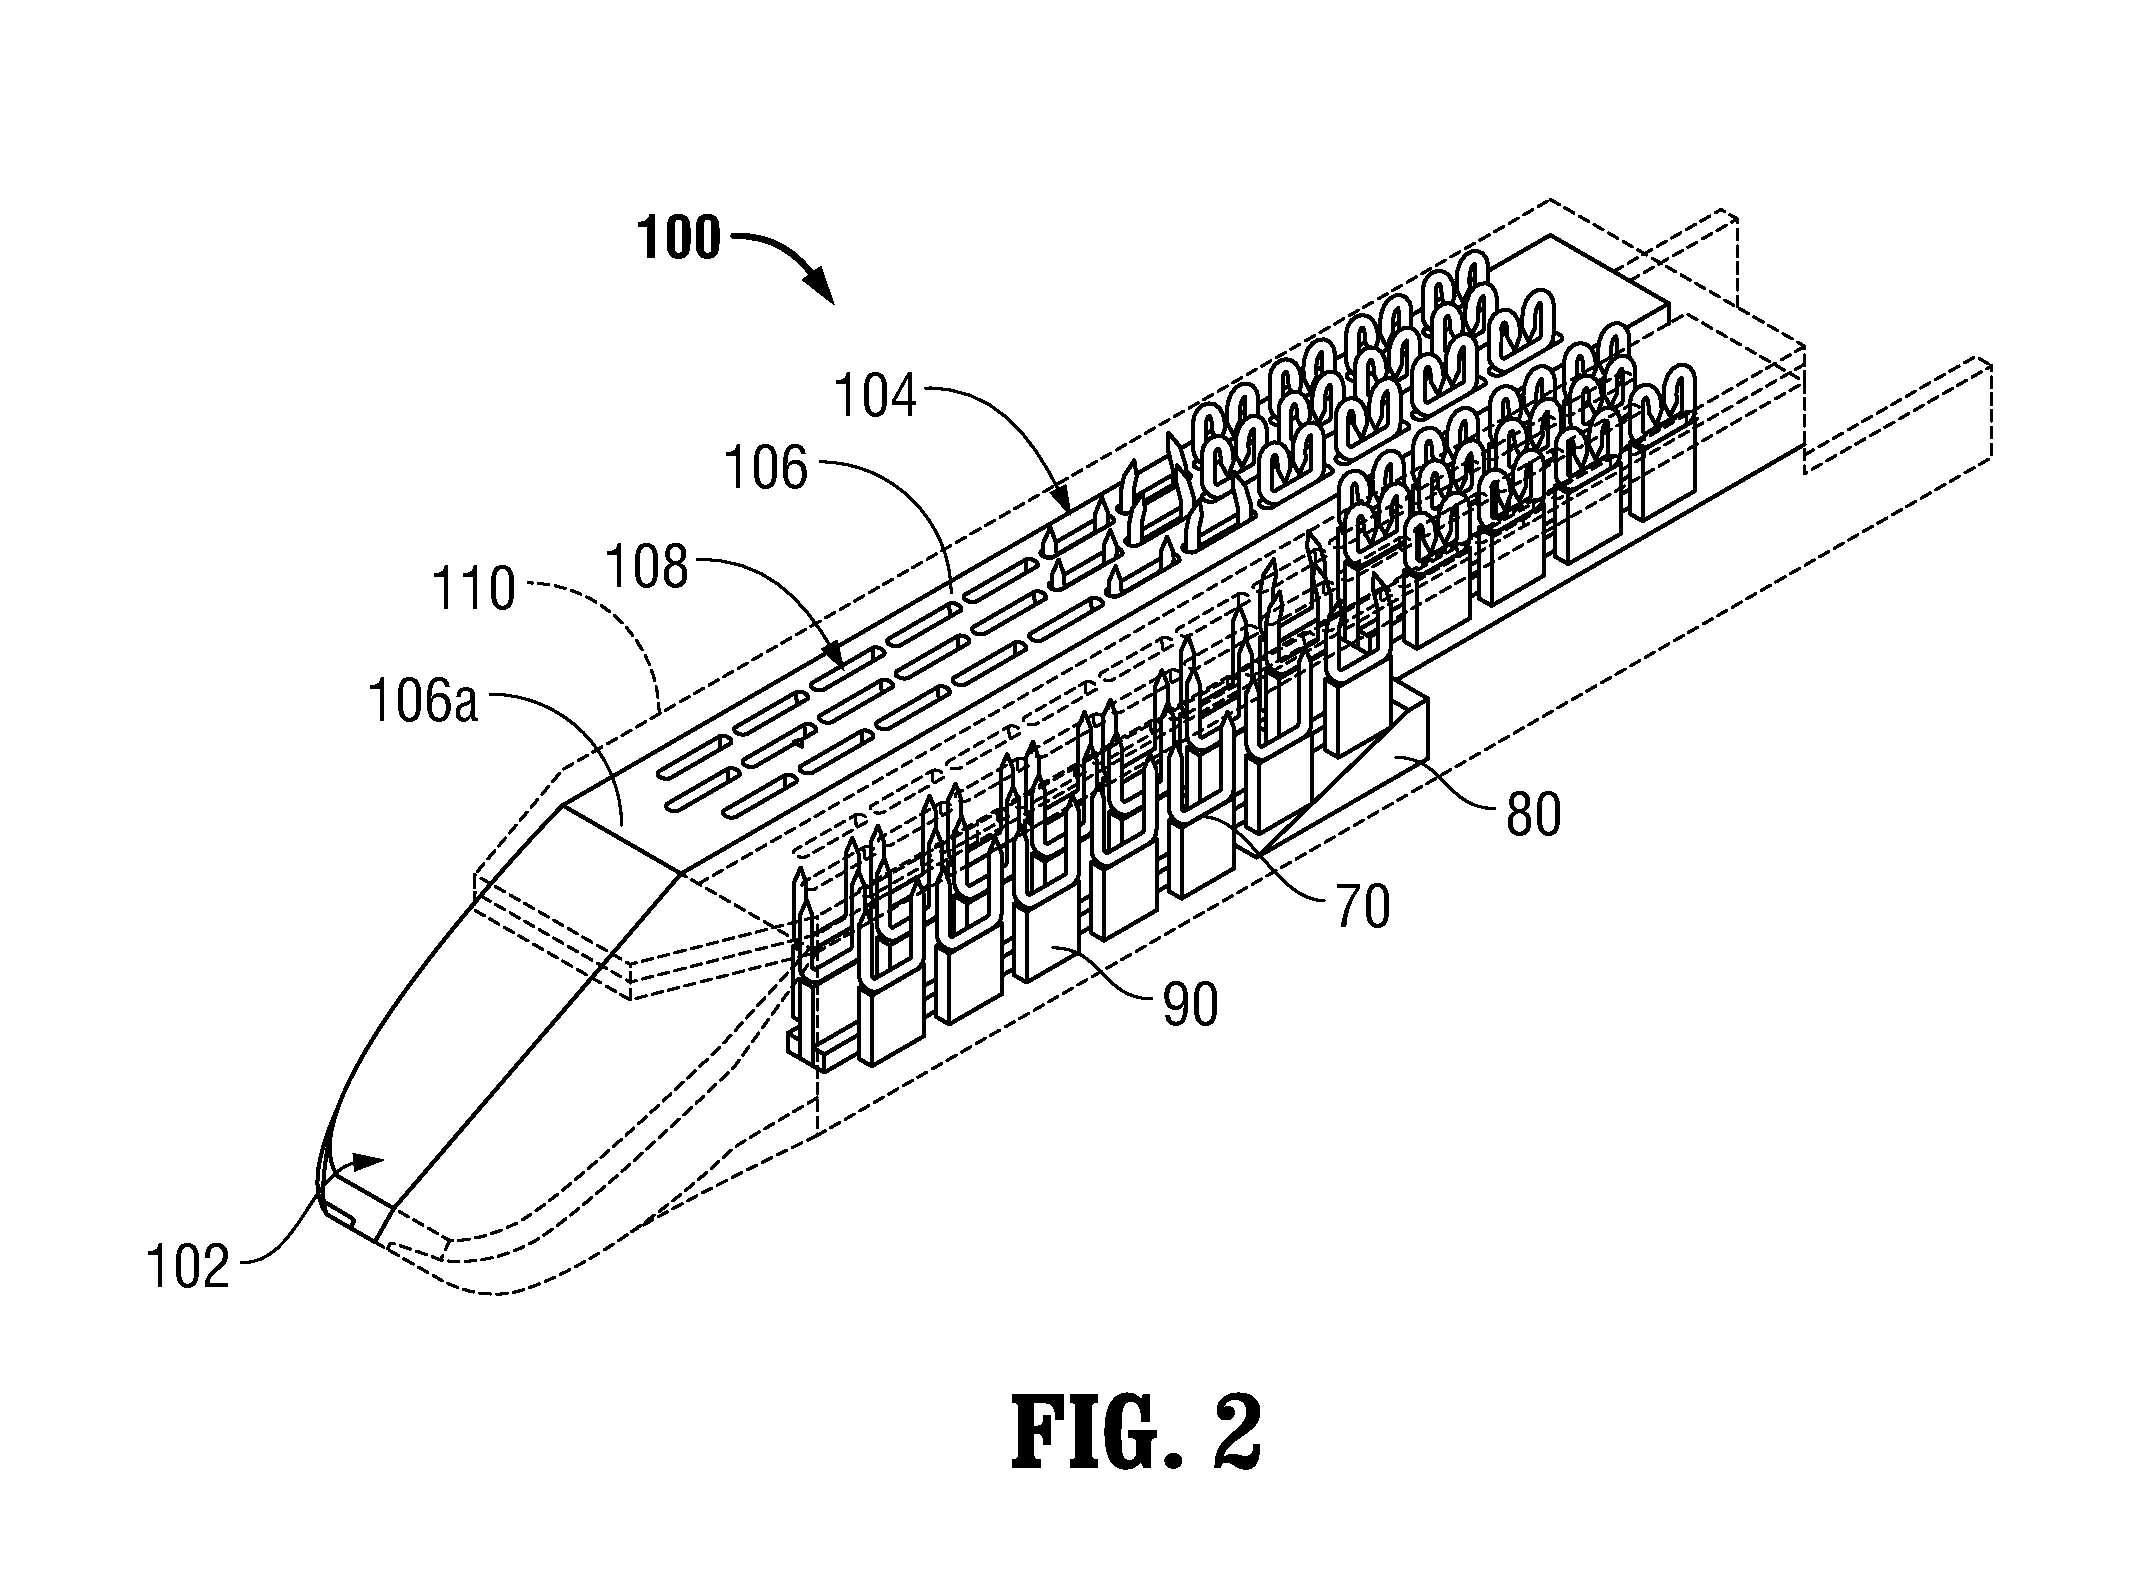 Surgical apparatus including surgical buttress